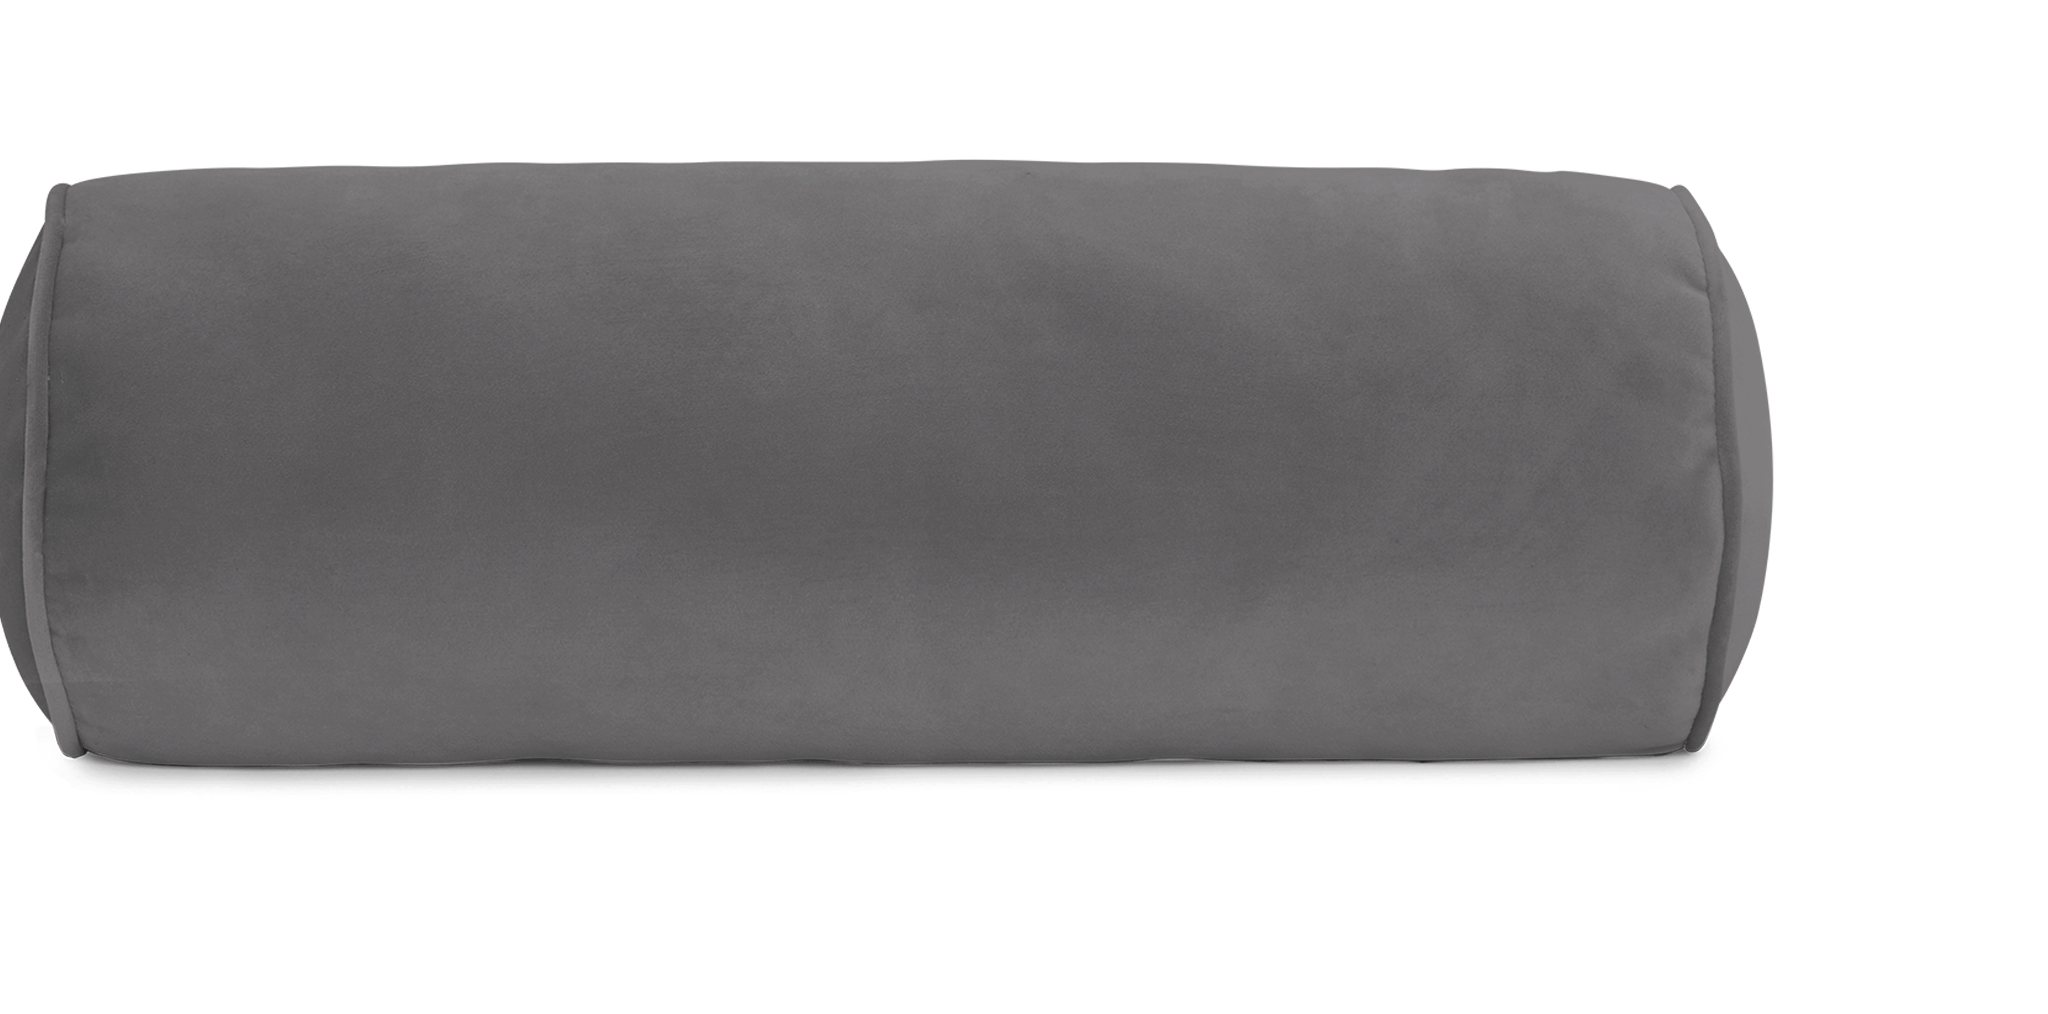 Yoga Bolster 8 x 24 (Standard Size) (Polyester Fill) – nussotex